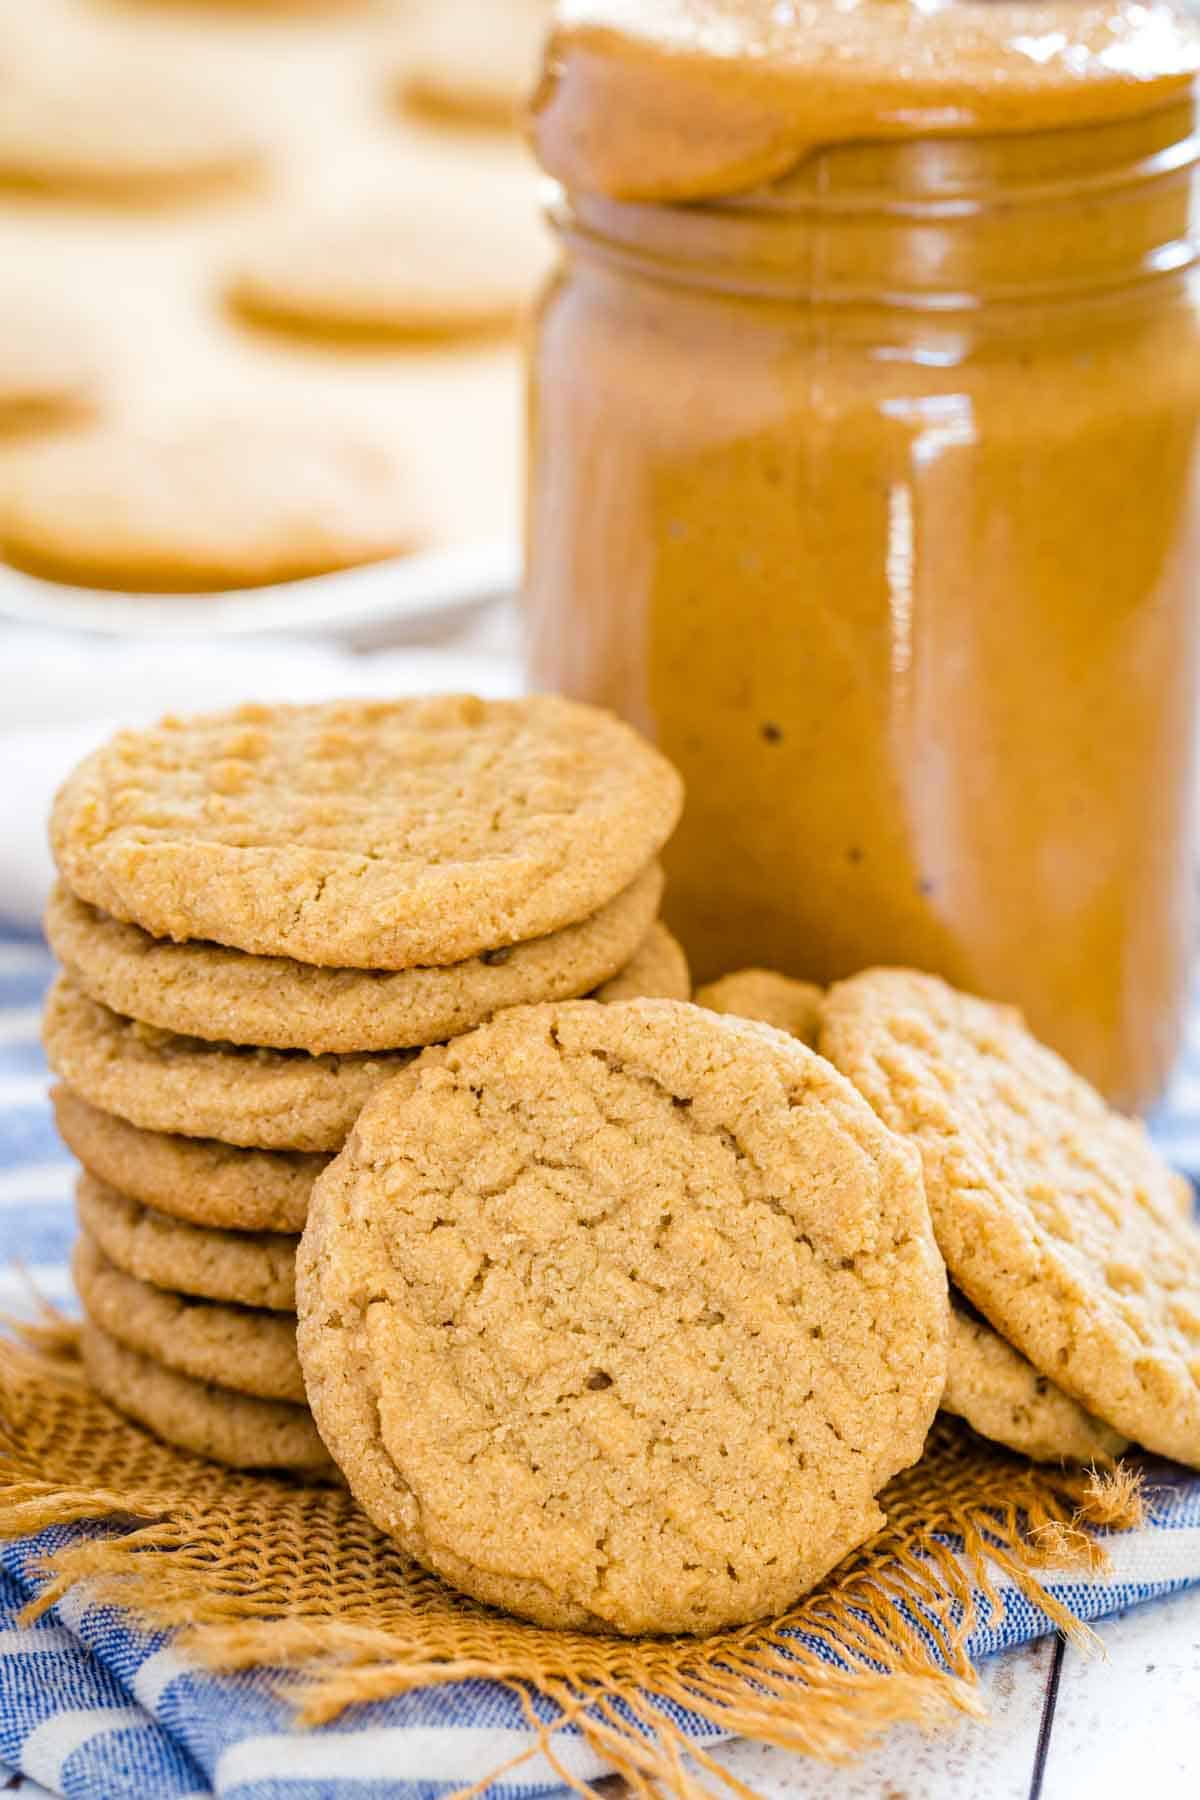 A gluten-free peanut butter cookie leaning against a stack of peanut butter cookies, with a jar of peanut butter in the background.